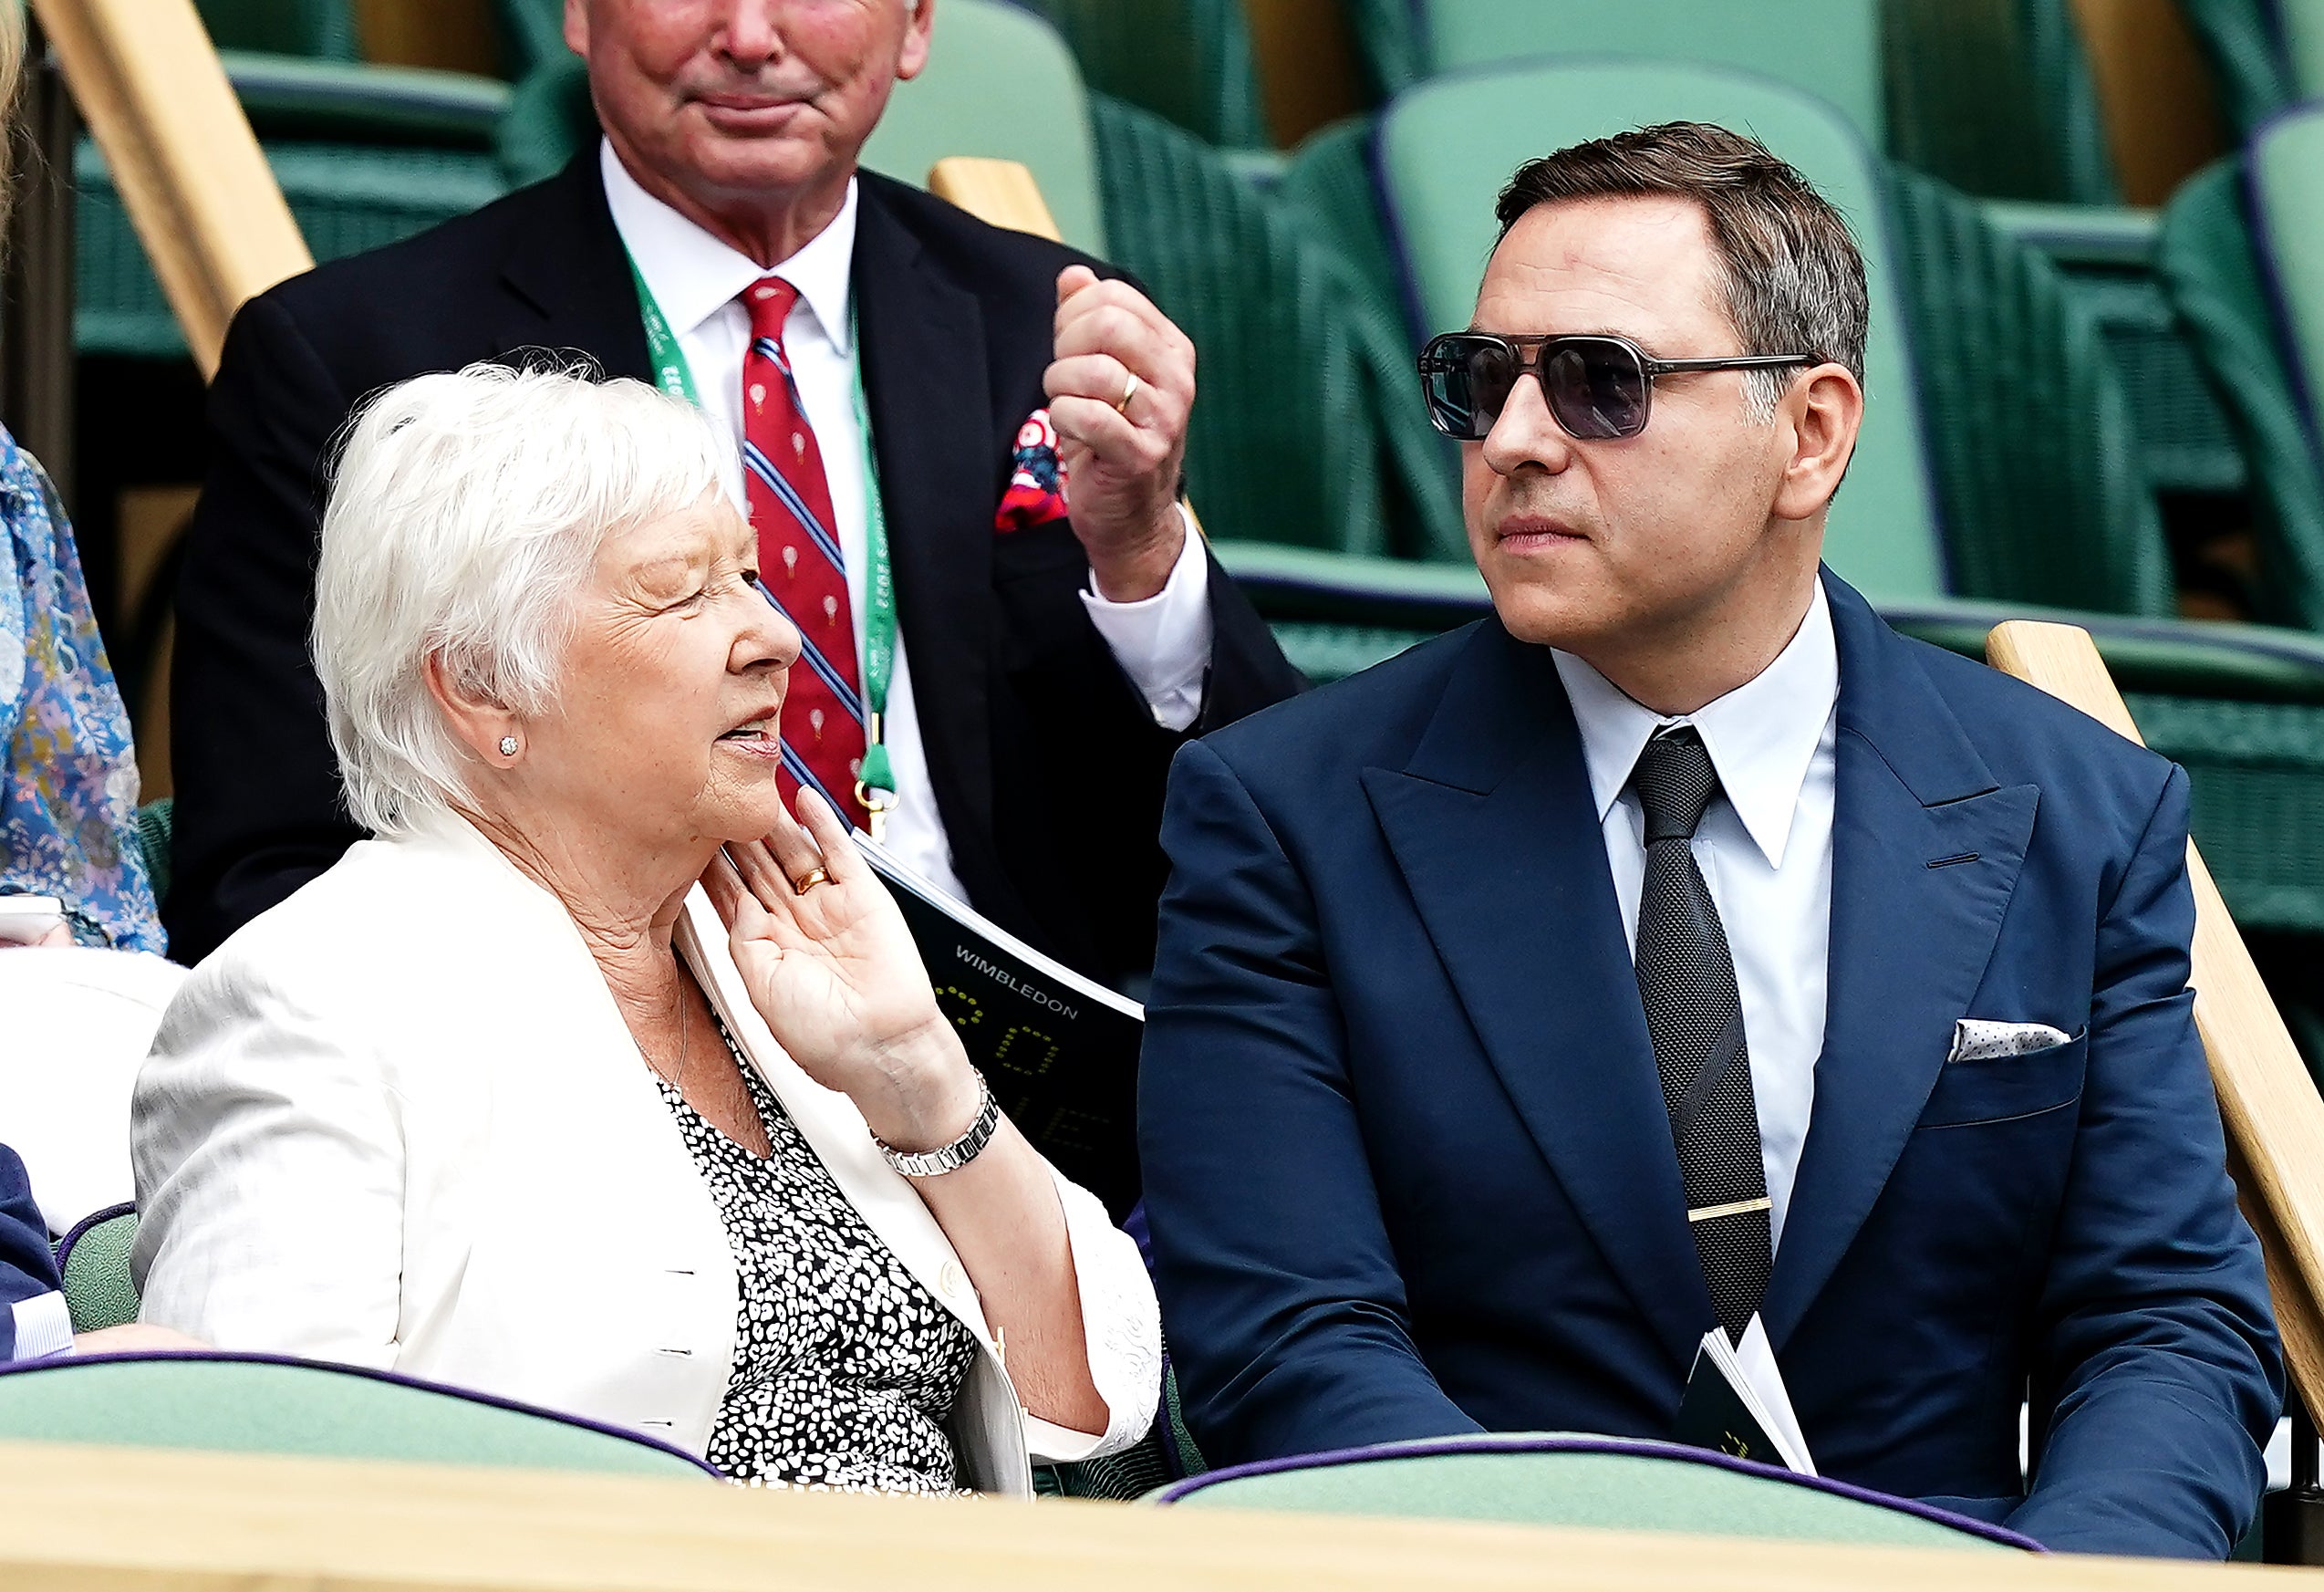 David Walliams (right) and mother Kathleen Williams in the royal box (Aaron Chown/PA)